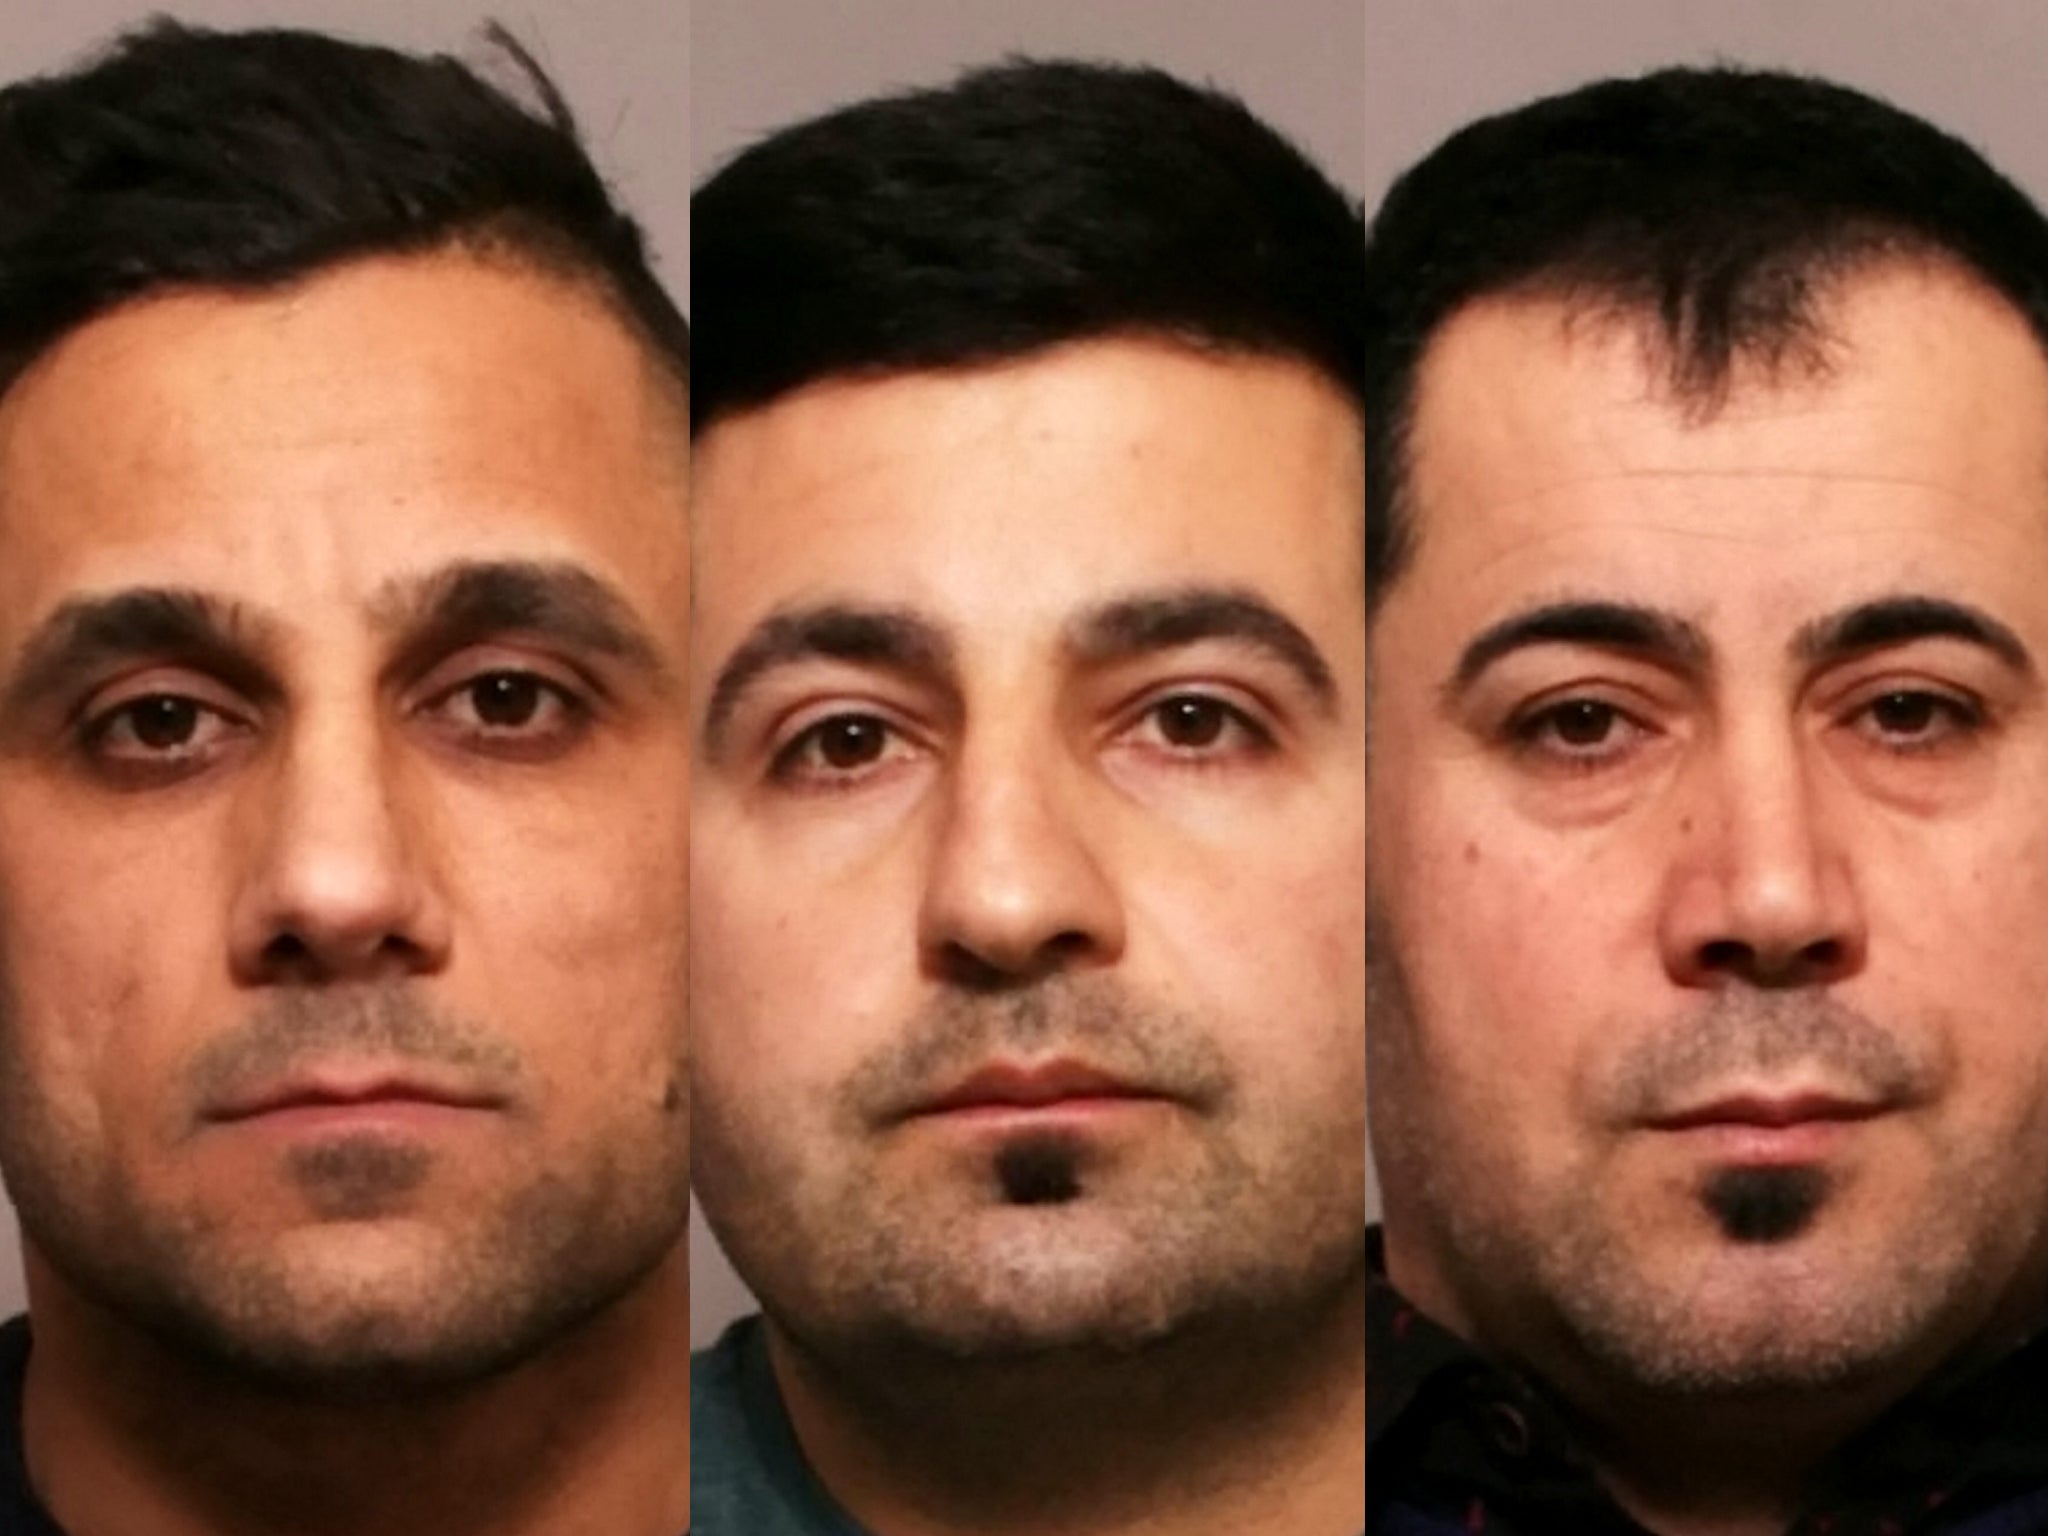 Kurd, Hassan and Ali (left to right) all receieved life sentences for their roles in the plot